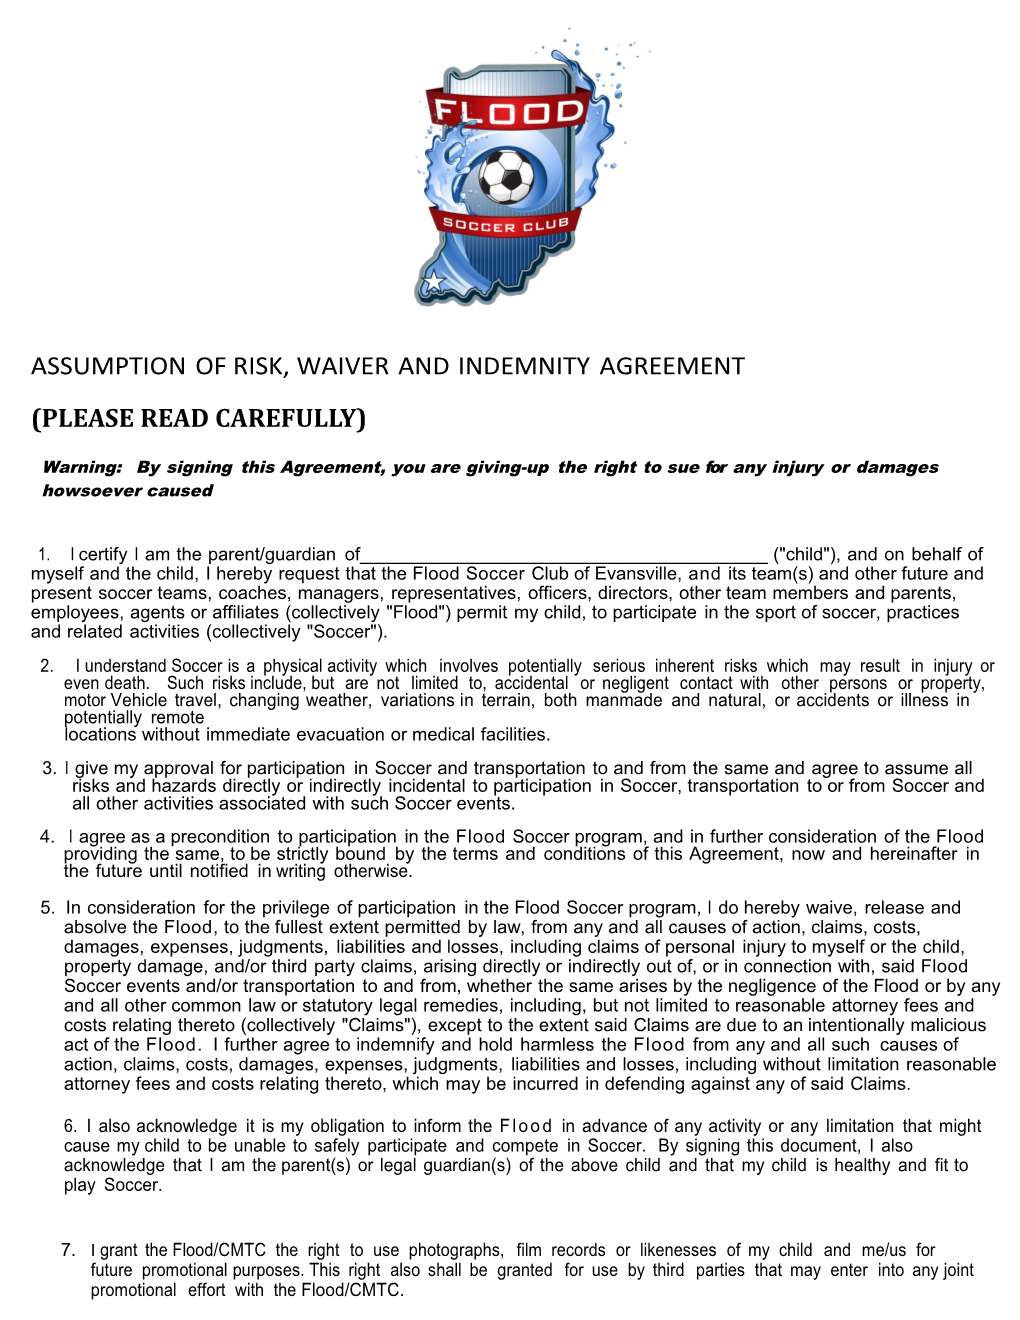 Assumption of Risk, Waiver and Indemnity Agreement (Please Read Carefully)